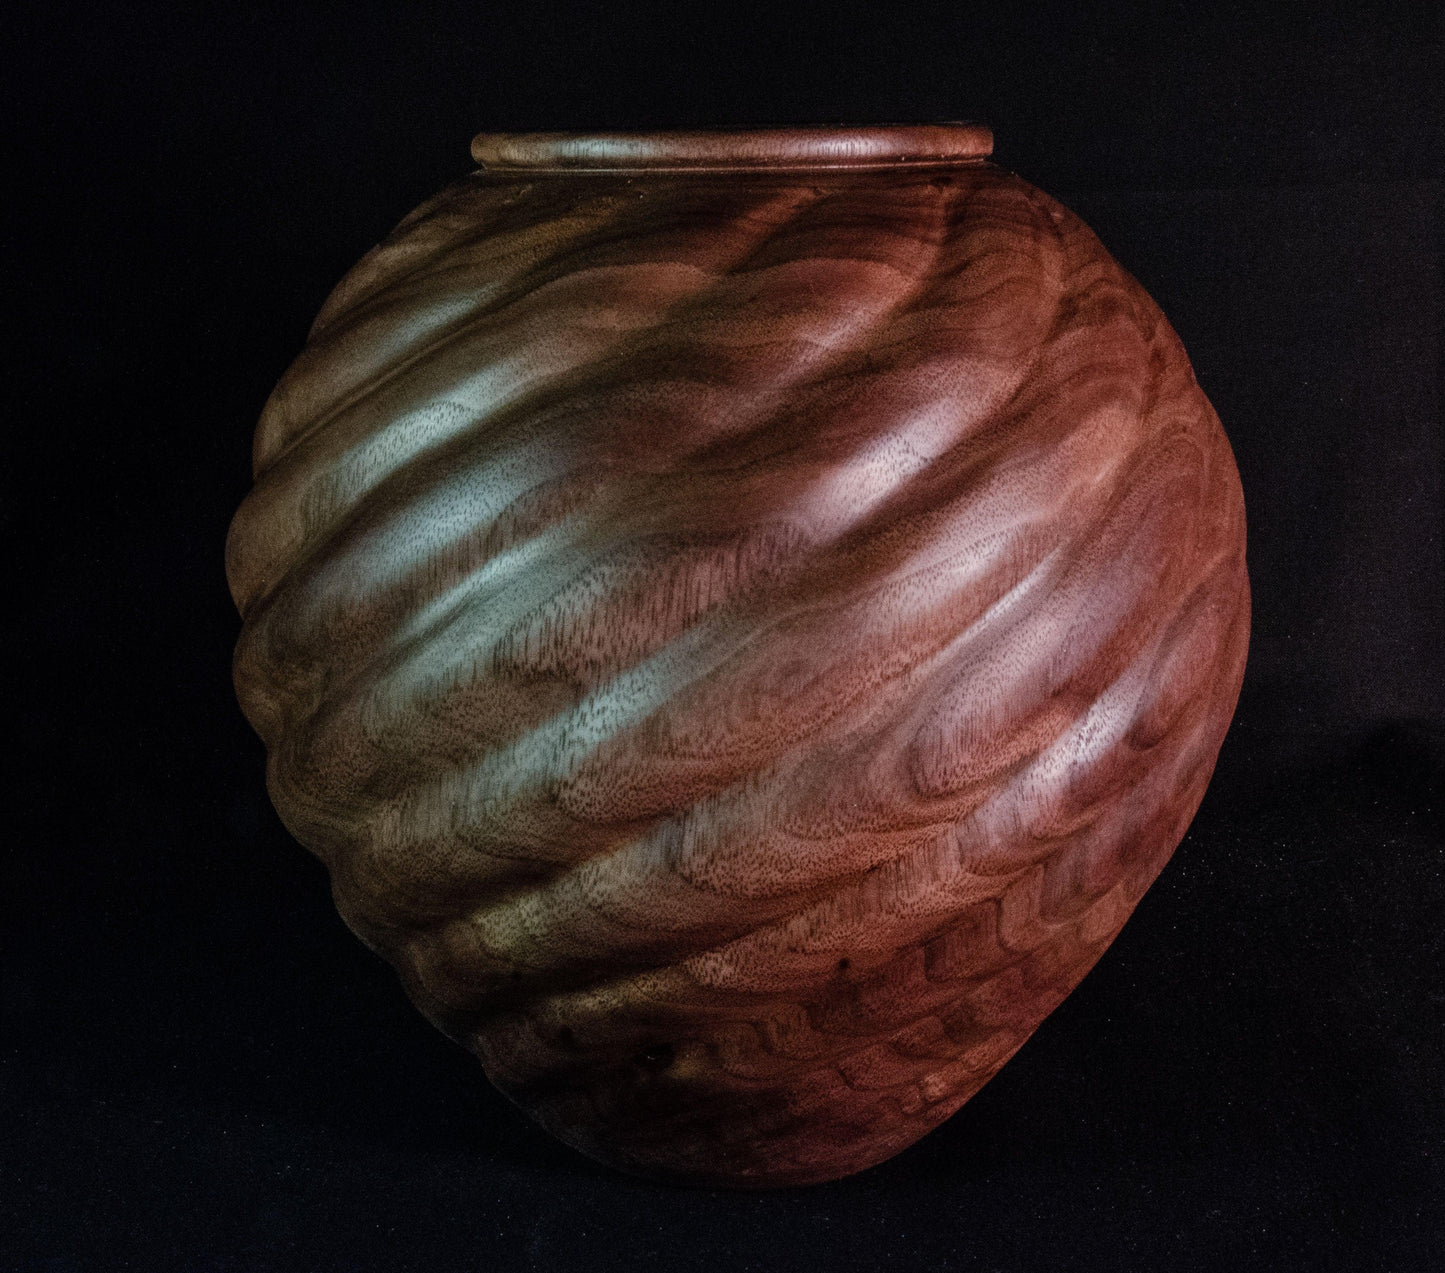 Spiral fluted walnut vessel. Beautiful unique handmade gift idea for home or wedding.